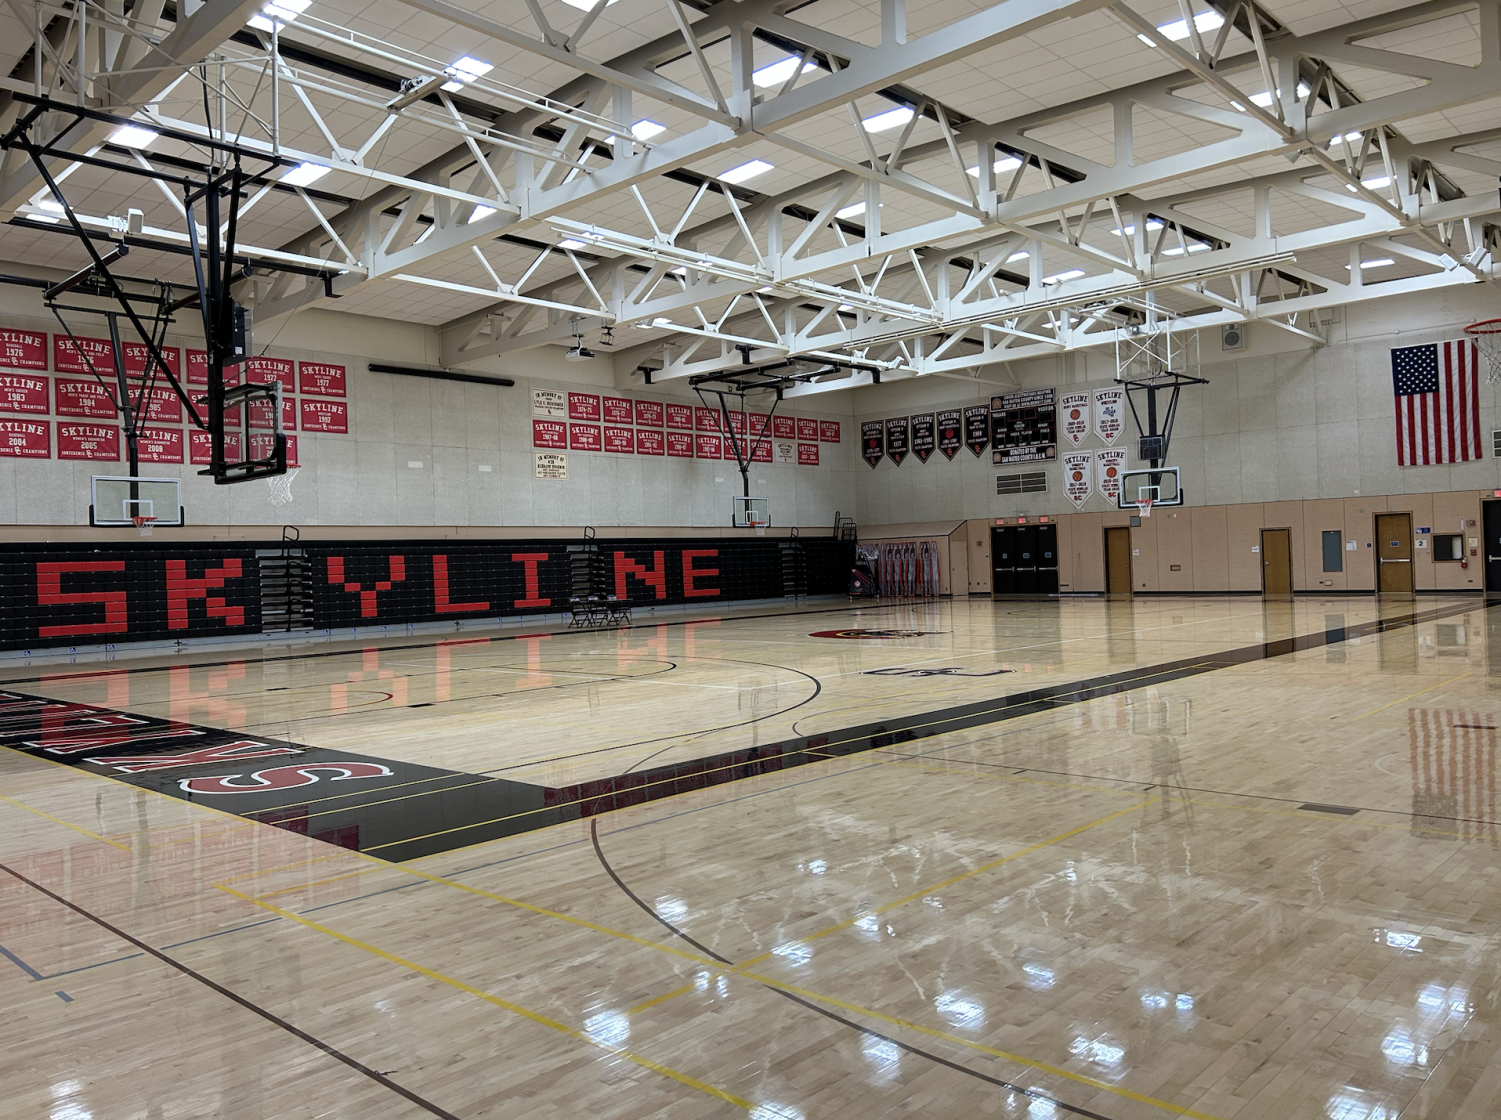 Skyline Colleges main gymnasium is empty on Friday afternoon in San Bruno, CA.